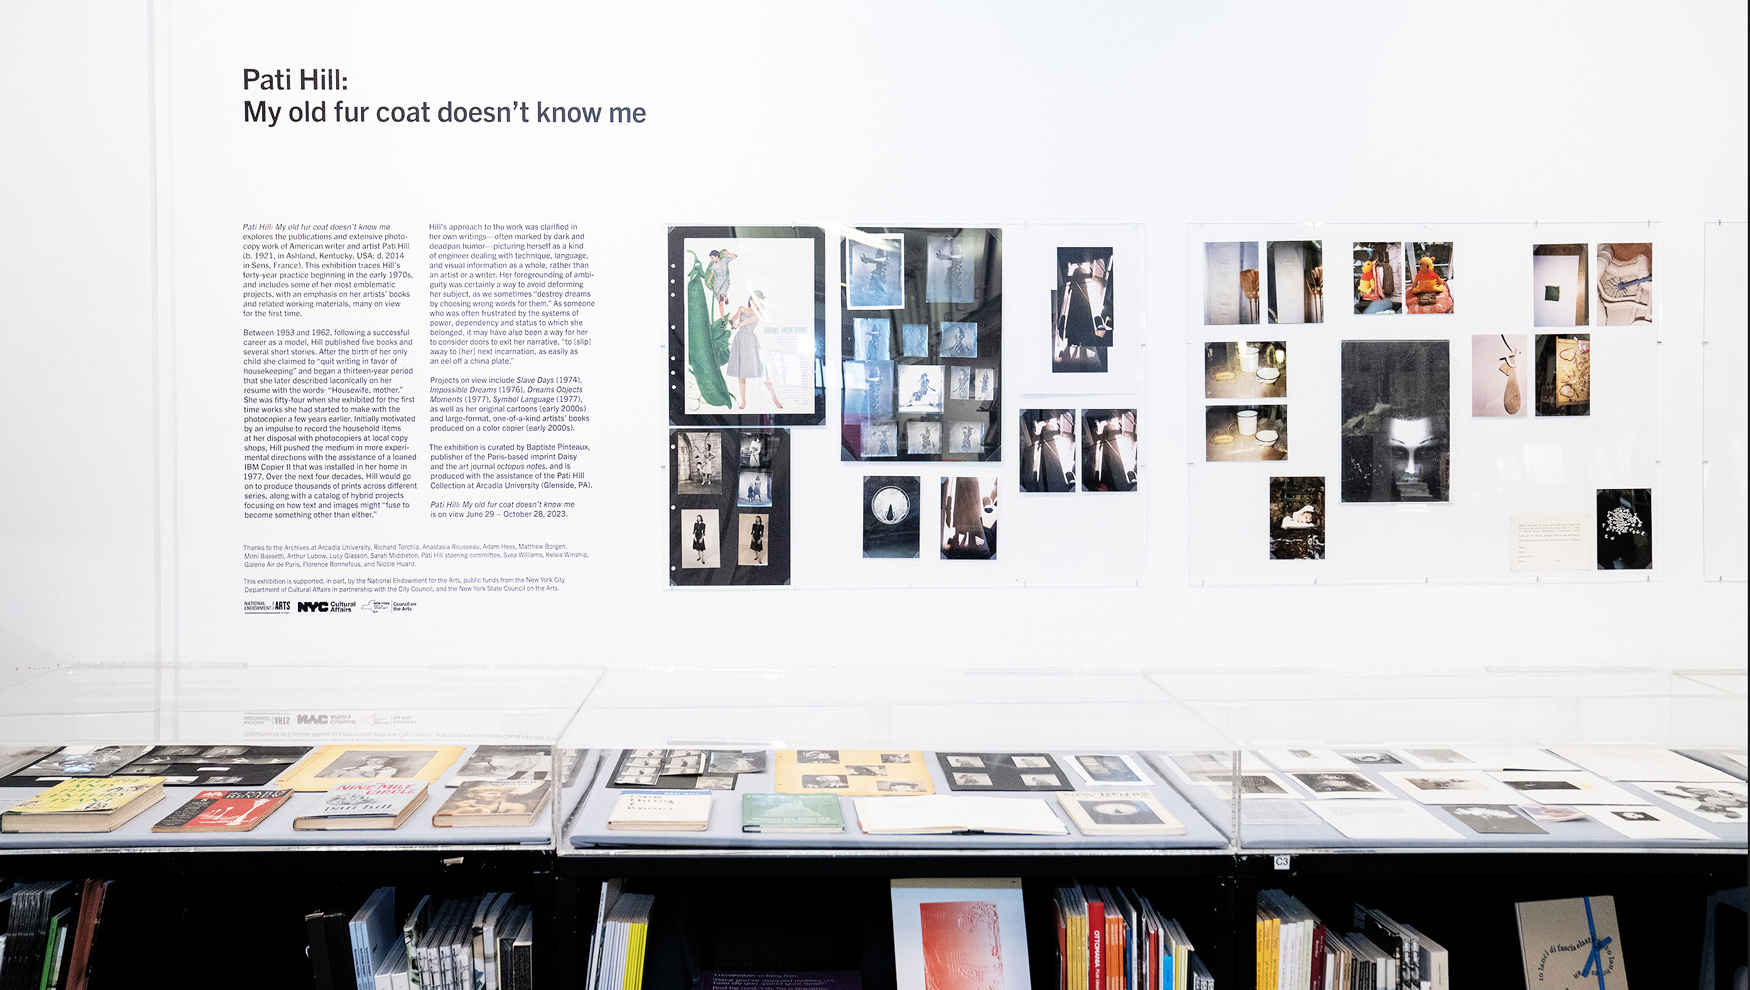 Installation view, "Pati Hill: My old fur coat doesn't know me, Printed Matter, New York